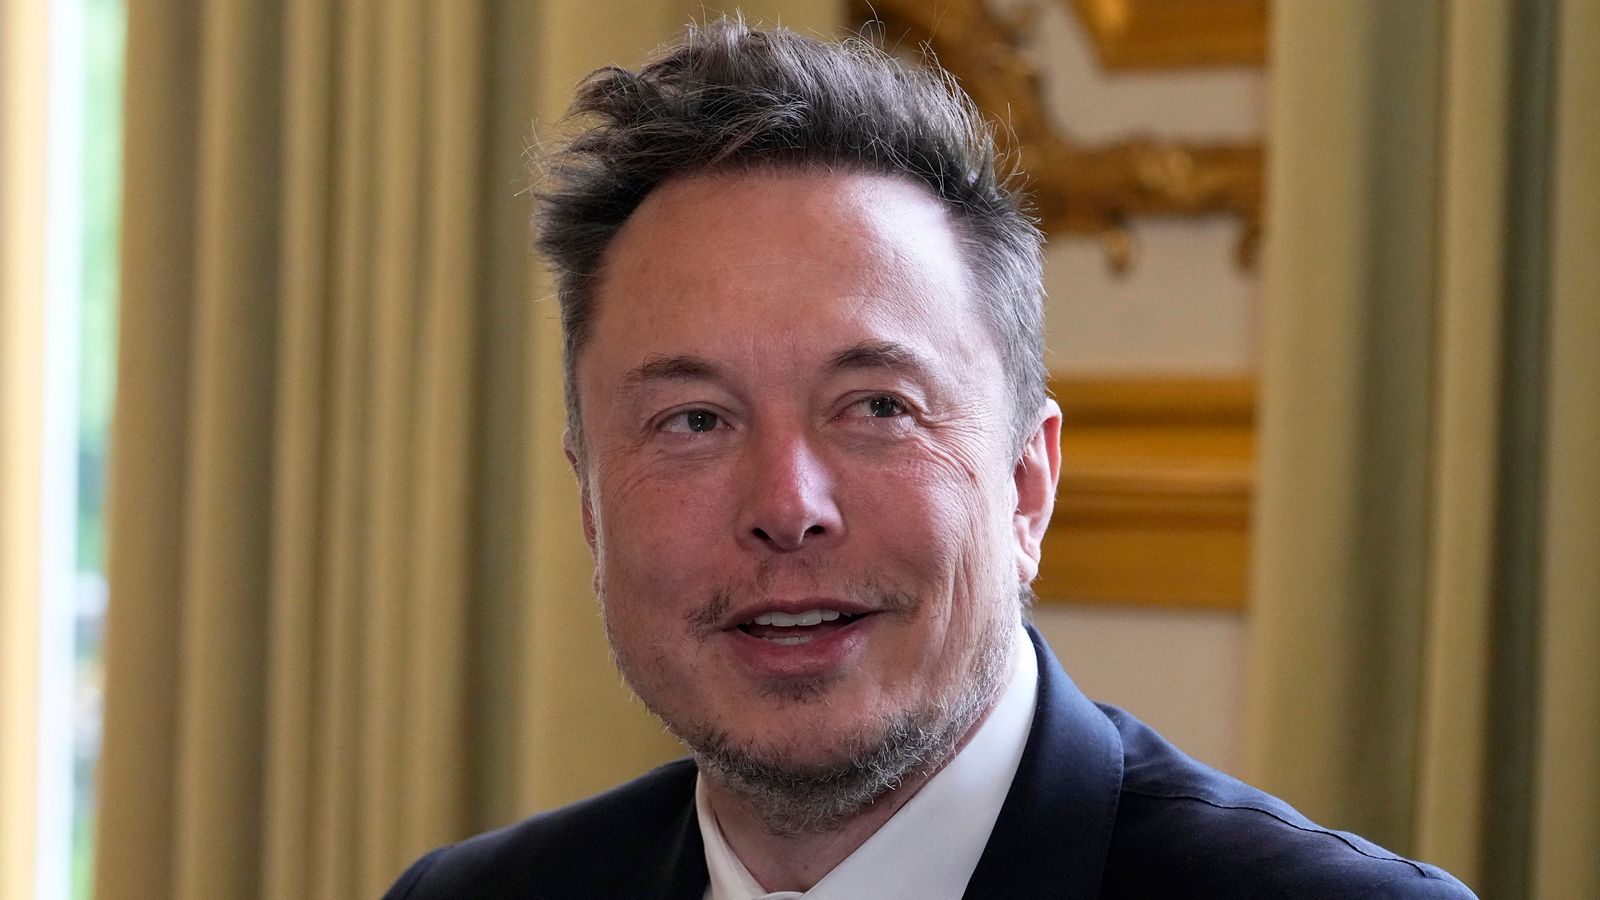 Elon Musk Warns of Dangerous Potential of Artificial Intelligence, Calls for Pause in Research